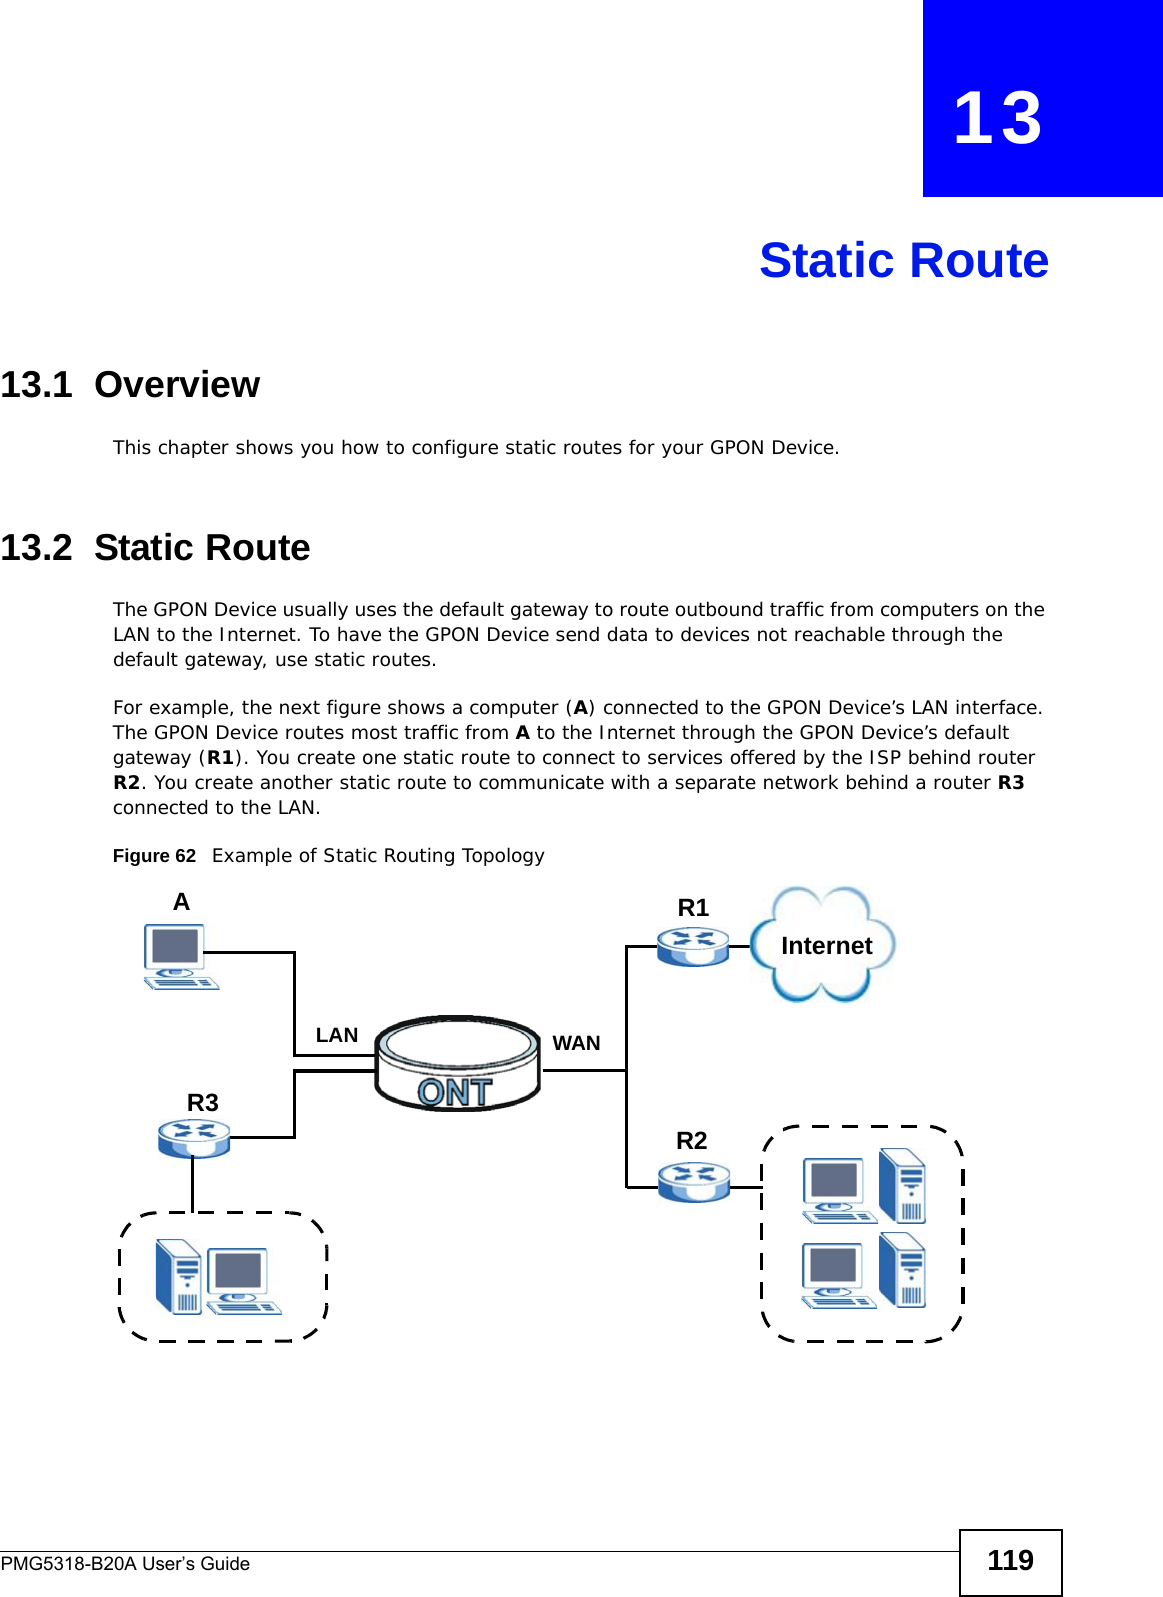 PMG5318-B20A User’s Guide 119CHAPTER   13Static Route13.1  OverviewThis chapter shows you how to configure static routes for your GPON Device.13.2  Static Route   The GPON Device usually uses the default gateway to route outbound traffic from computers on the LAN to the Internet. To have the GPON Device send data to devices not reachable through the default gateway, use static routes.For example, the next figure shows a computer (A) connected to the GPON Device’s LAN interface. The GPON Device routes most traffic from A to the Internet through the GPON Device’s default gateway (R1). You create one static route to connect to services offered by the ISP behind router R2. You create another static route to communicate with a separate network behind a router R3 connected to the LAN. Figure 62   Example of Static Routing TopologyWANR1R2AR3LANInternet